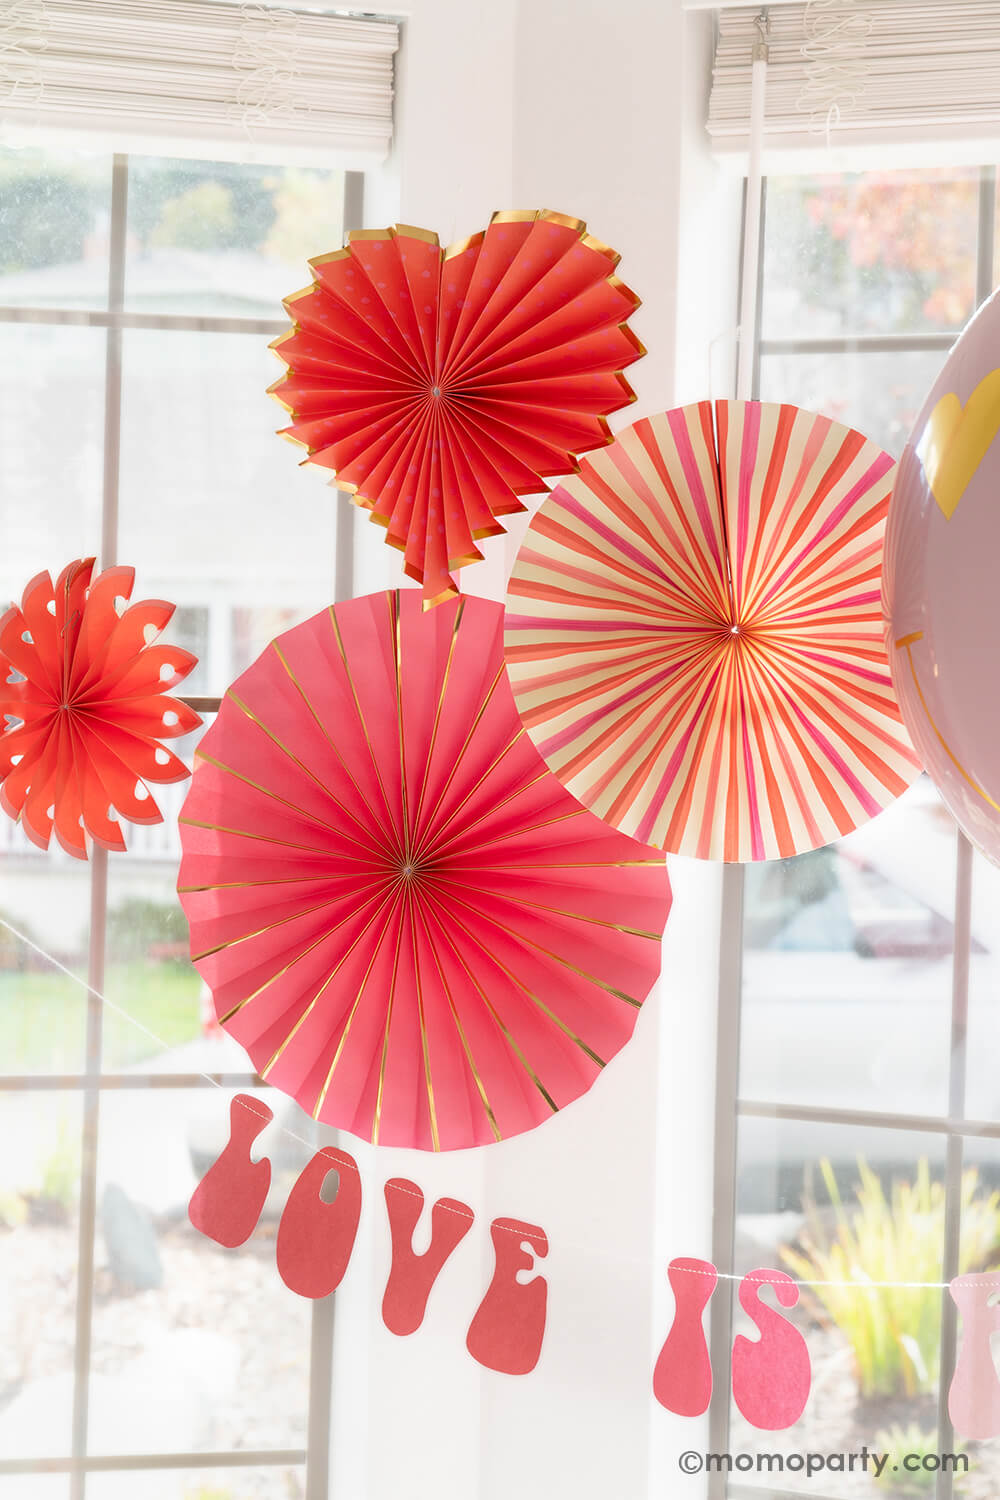 A close-up of Momo Party's Groovy Valentine's Day Party decorations, showcasing the My Mind's Eye Heart You Paper Fan Set with both round and heart-shaped paper fans. The set includes 6 assorted paper fans, adding a delightful touch to the celebration. Paired with a retro-style Love Is All You Need Banner hanging below, these products offer an easy and quick setup for the perfect Valentine's Day party or any romantic occasion. A perfect inspiration for your V-day celebration!"